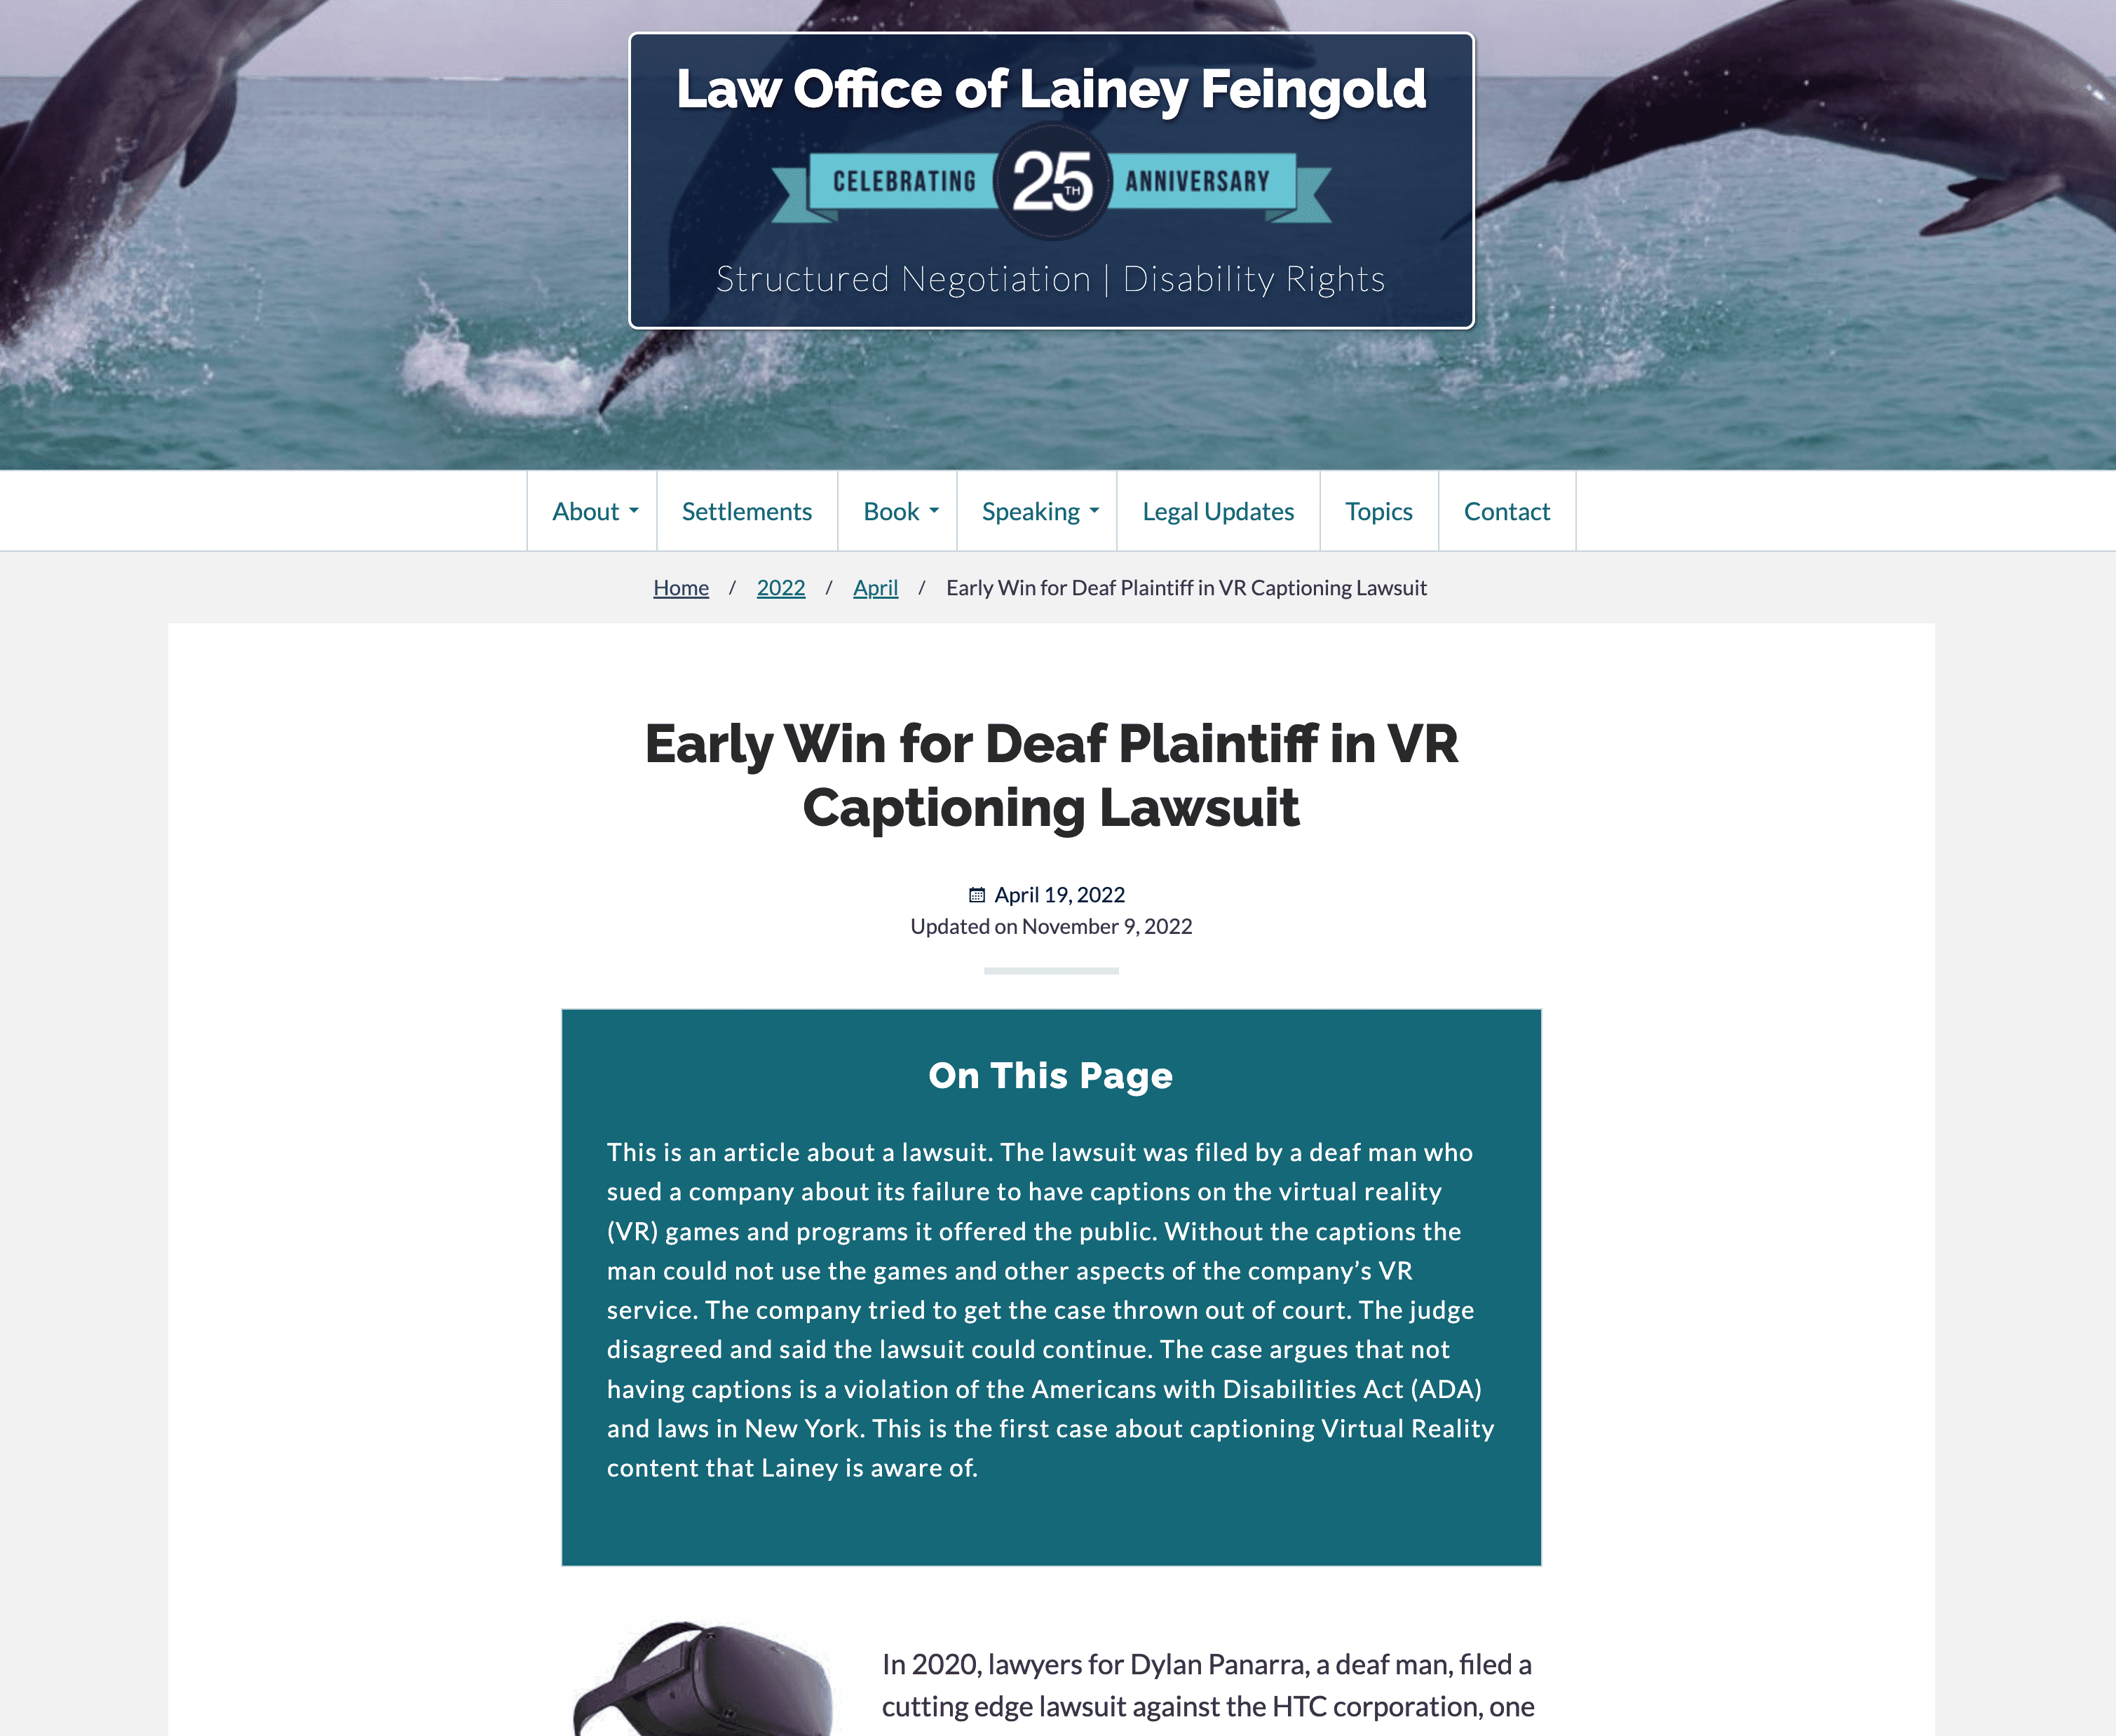 Simplified Summary on Lainey Feingolds Website